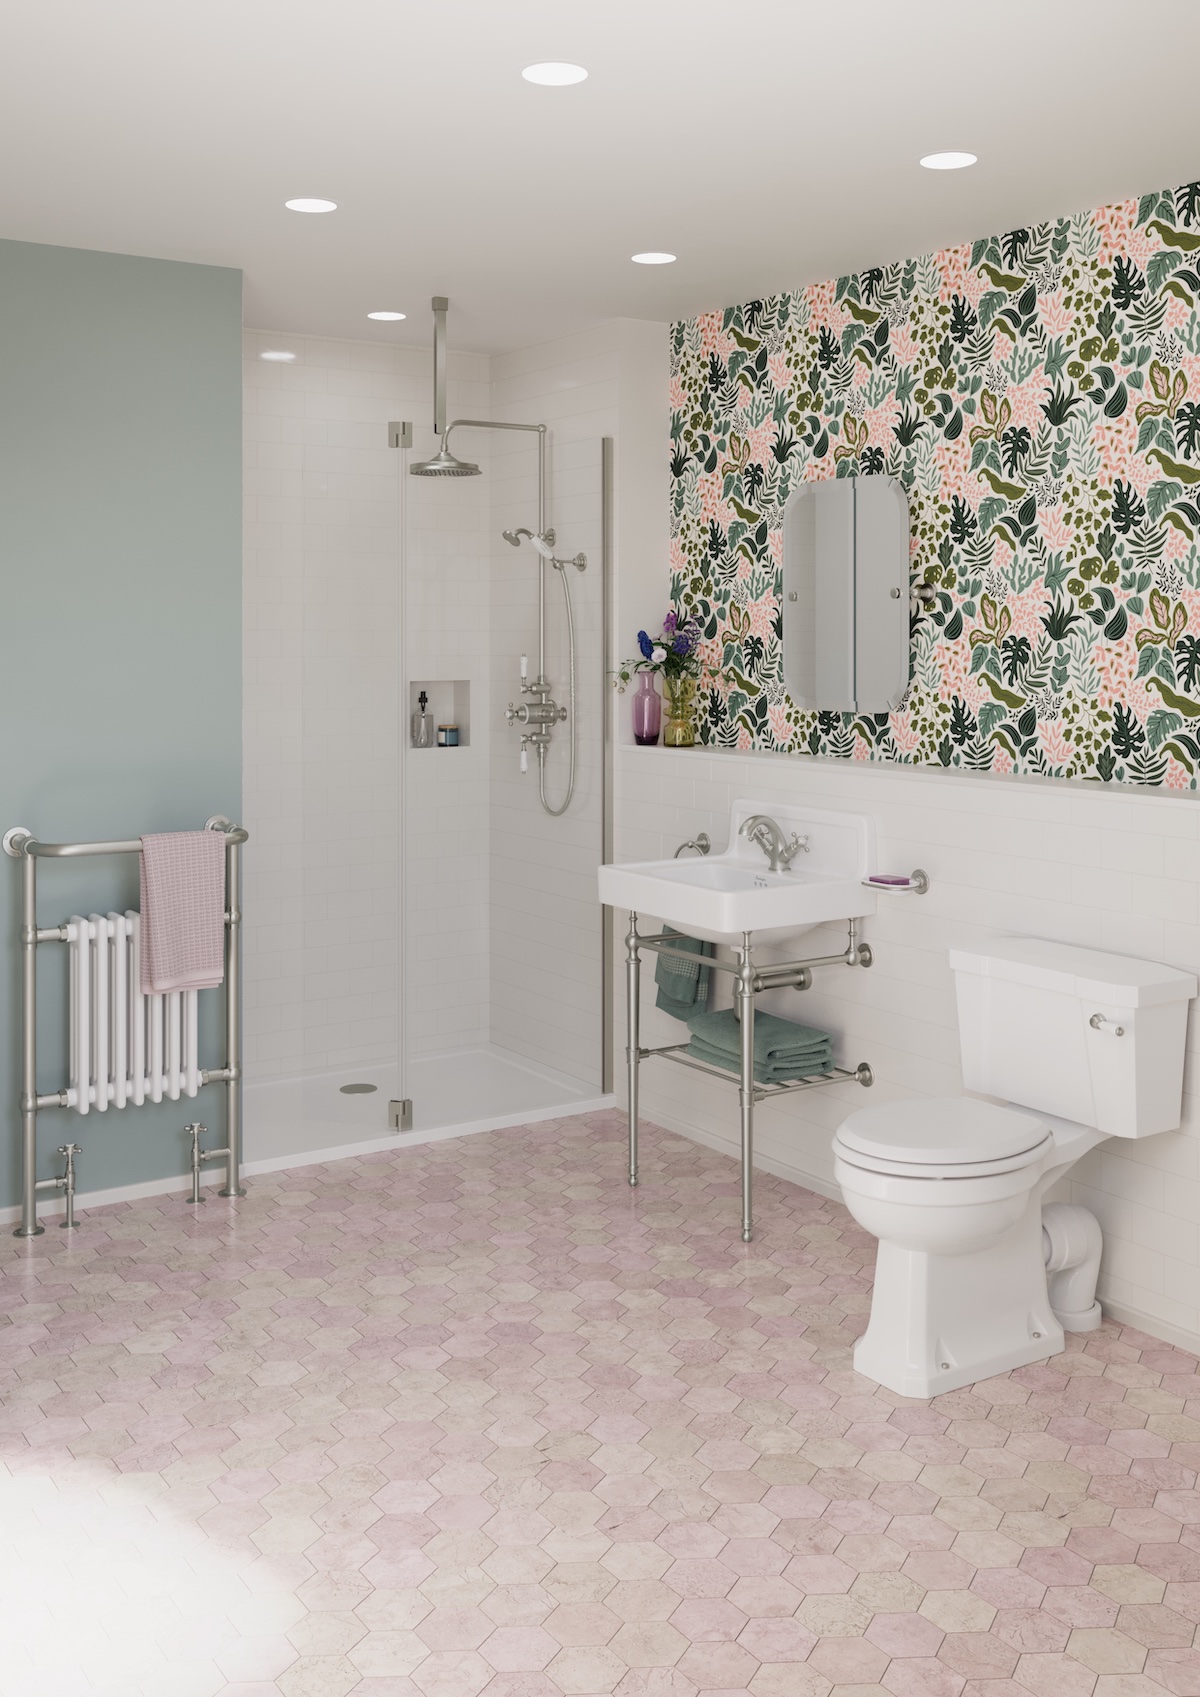 A traditional bathroom with pink tiled floors and floral back wall